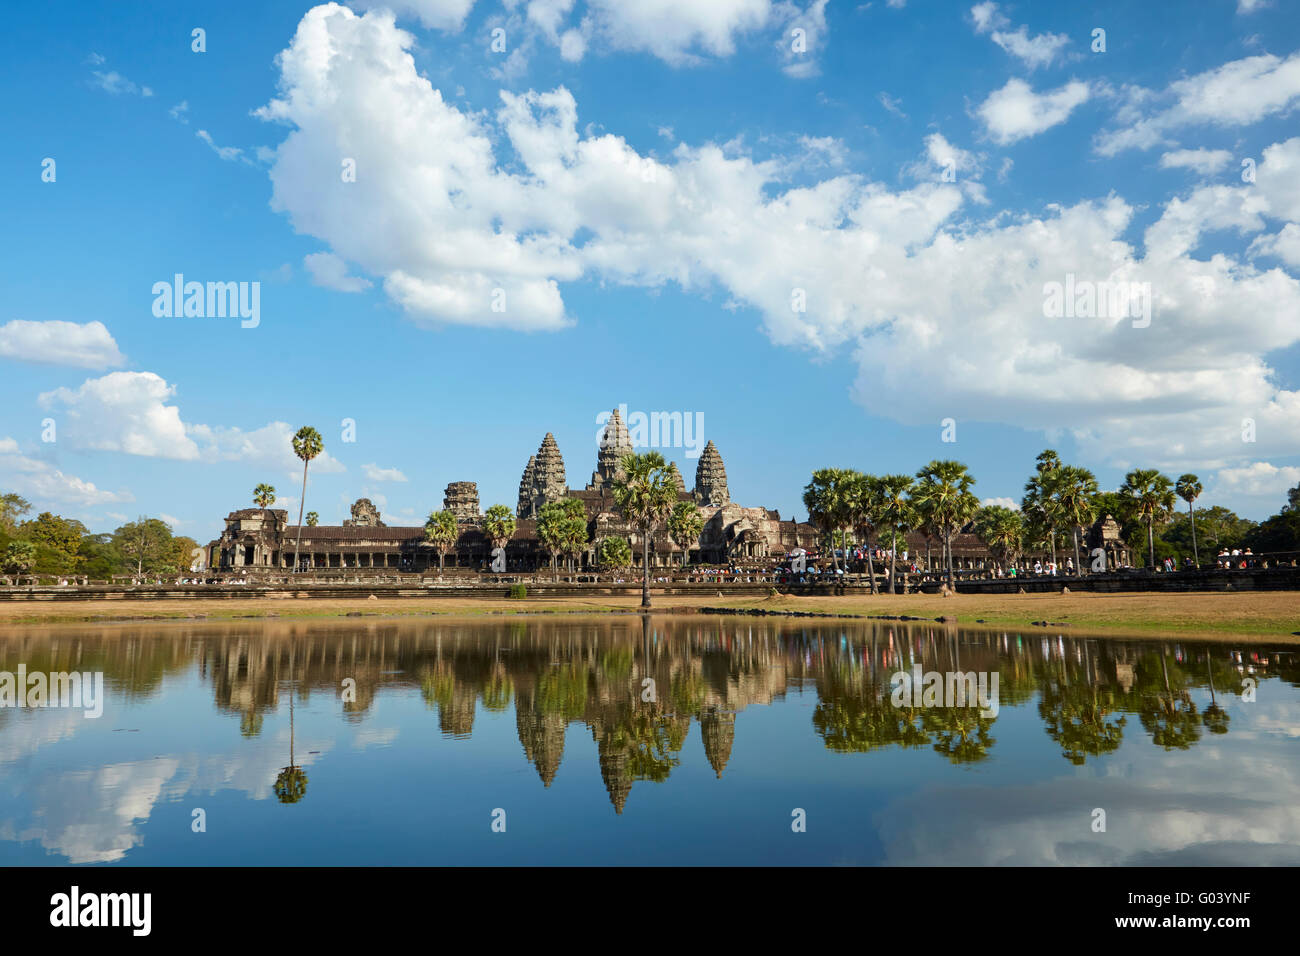 Angkor Wat temple complex (12th century), Angkor World Heritage Site, Siem Reap, Cambodia Stock Photo